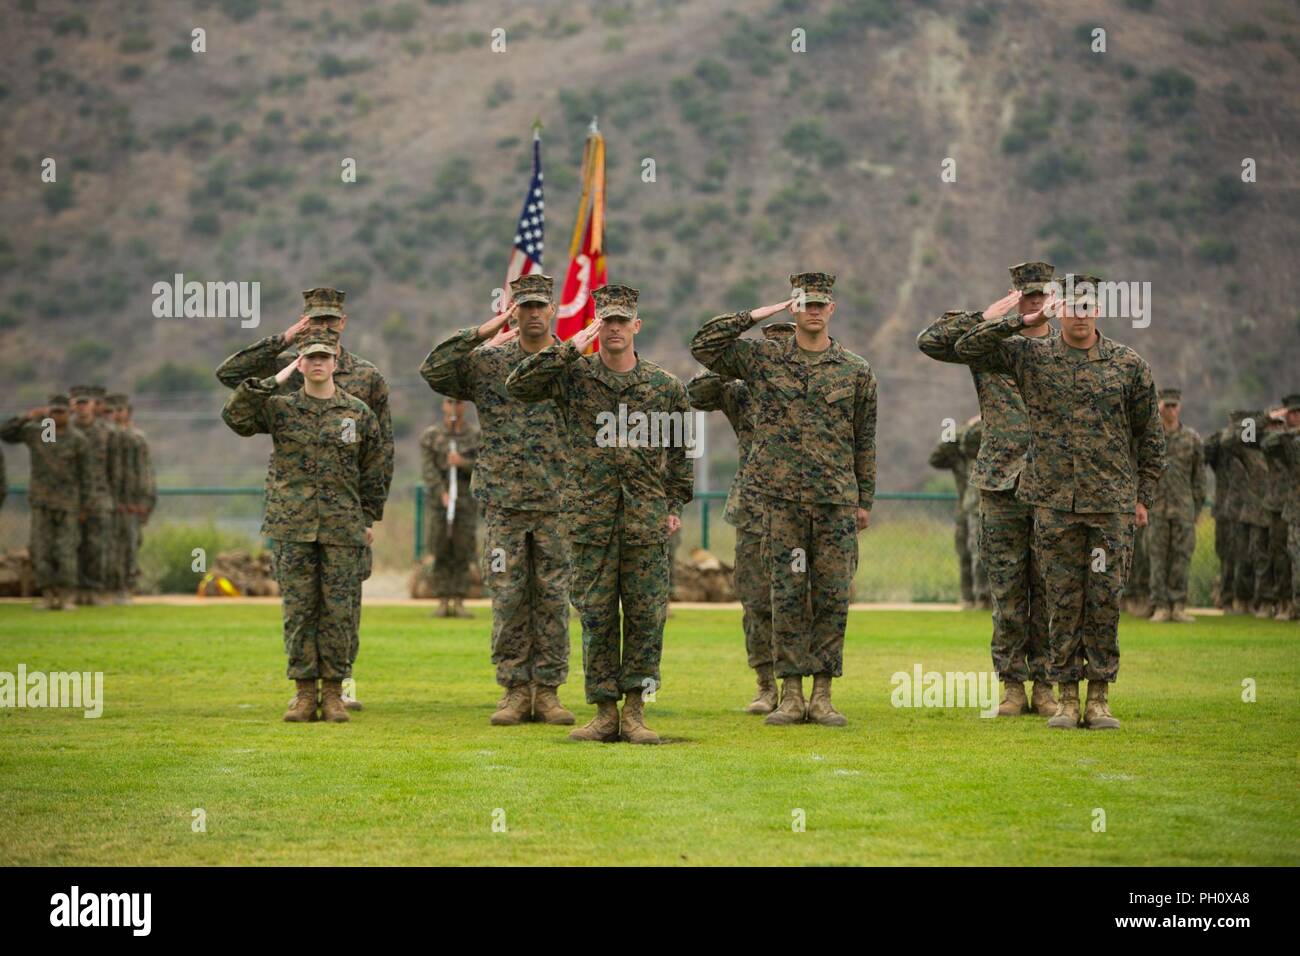 U.S. Marines with 1st Combat Engineer Battalion (CEB), 1st Marine Division, salute during a change of command ceremony at Marine Corps Base Camp Pendleton, Calif., June 22, 2018. The ceremony was held as a formal transfer of authority and responsibility from Lt. Col. Christopher M. Haar, offgoing commanding officer of 1st CEB, to Lt. Col. Michelle I. Macander, incoming commanding officer of 1st CEB. Stock Photo